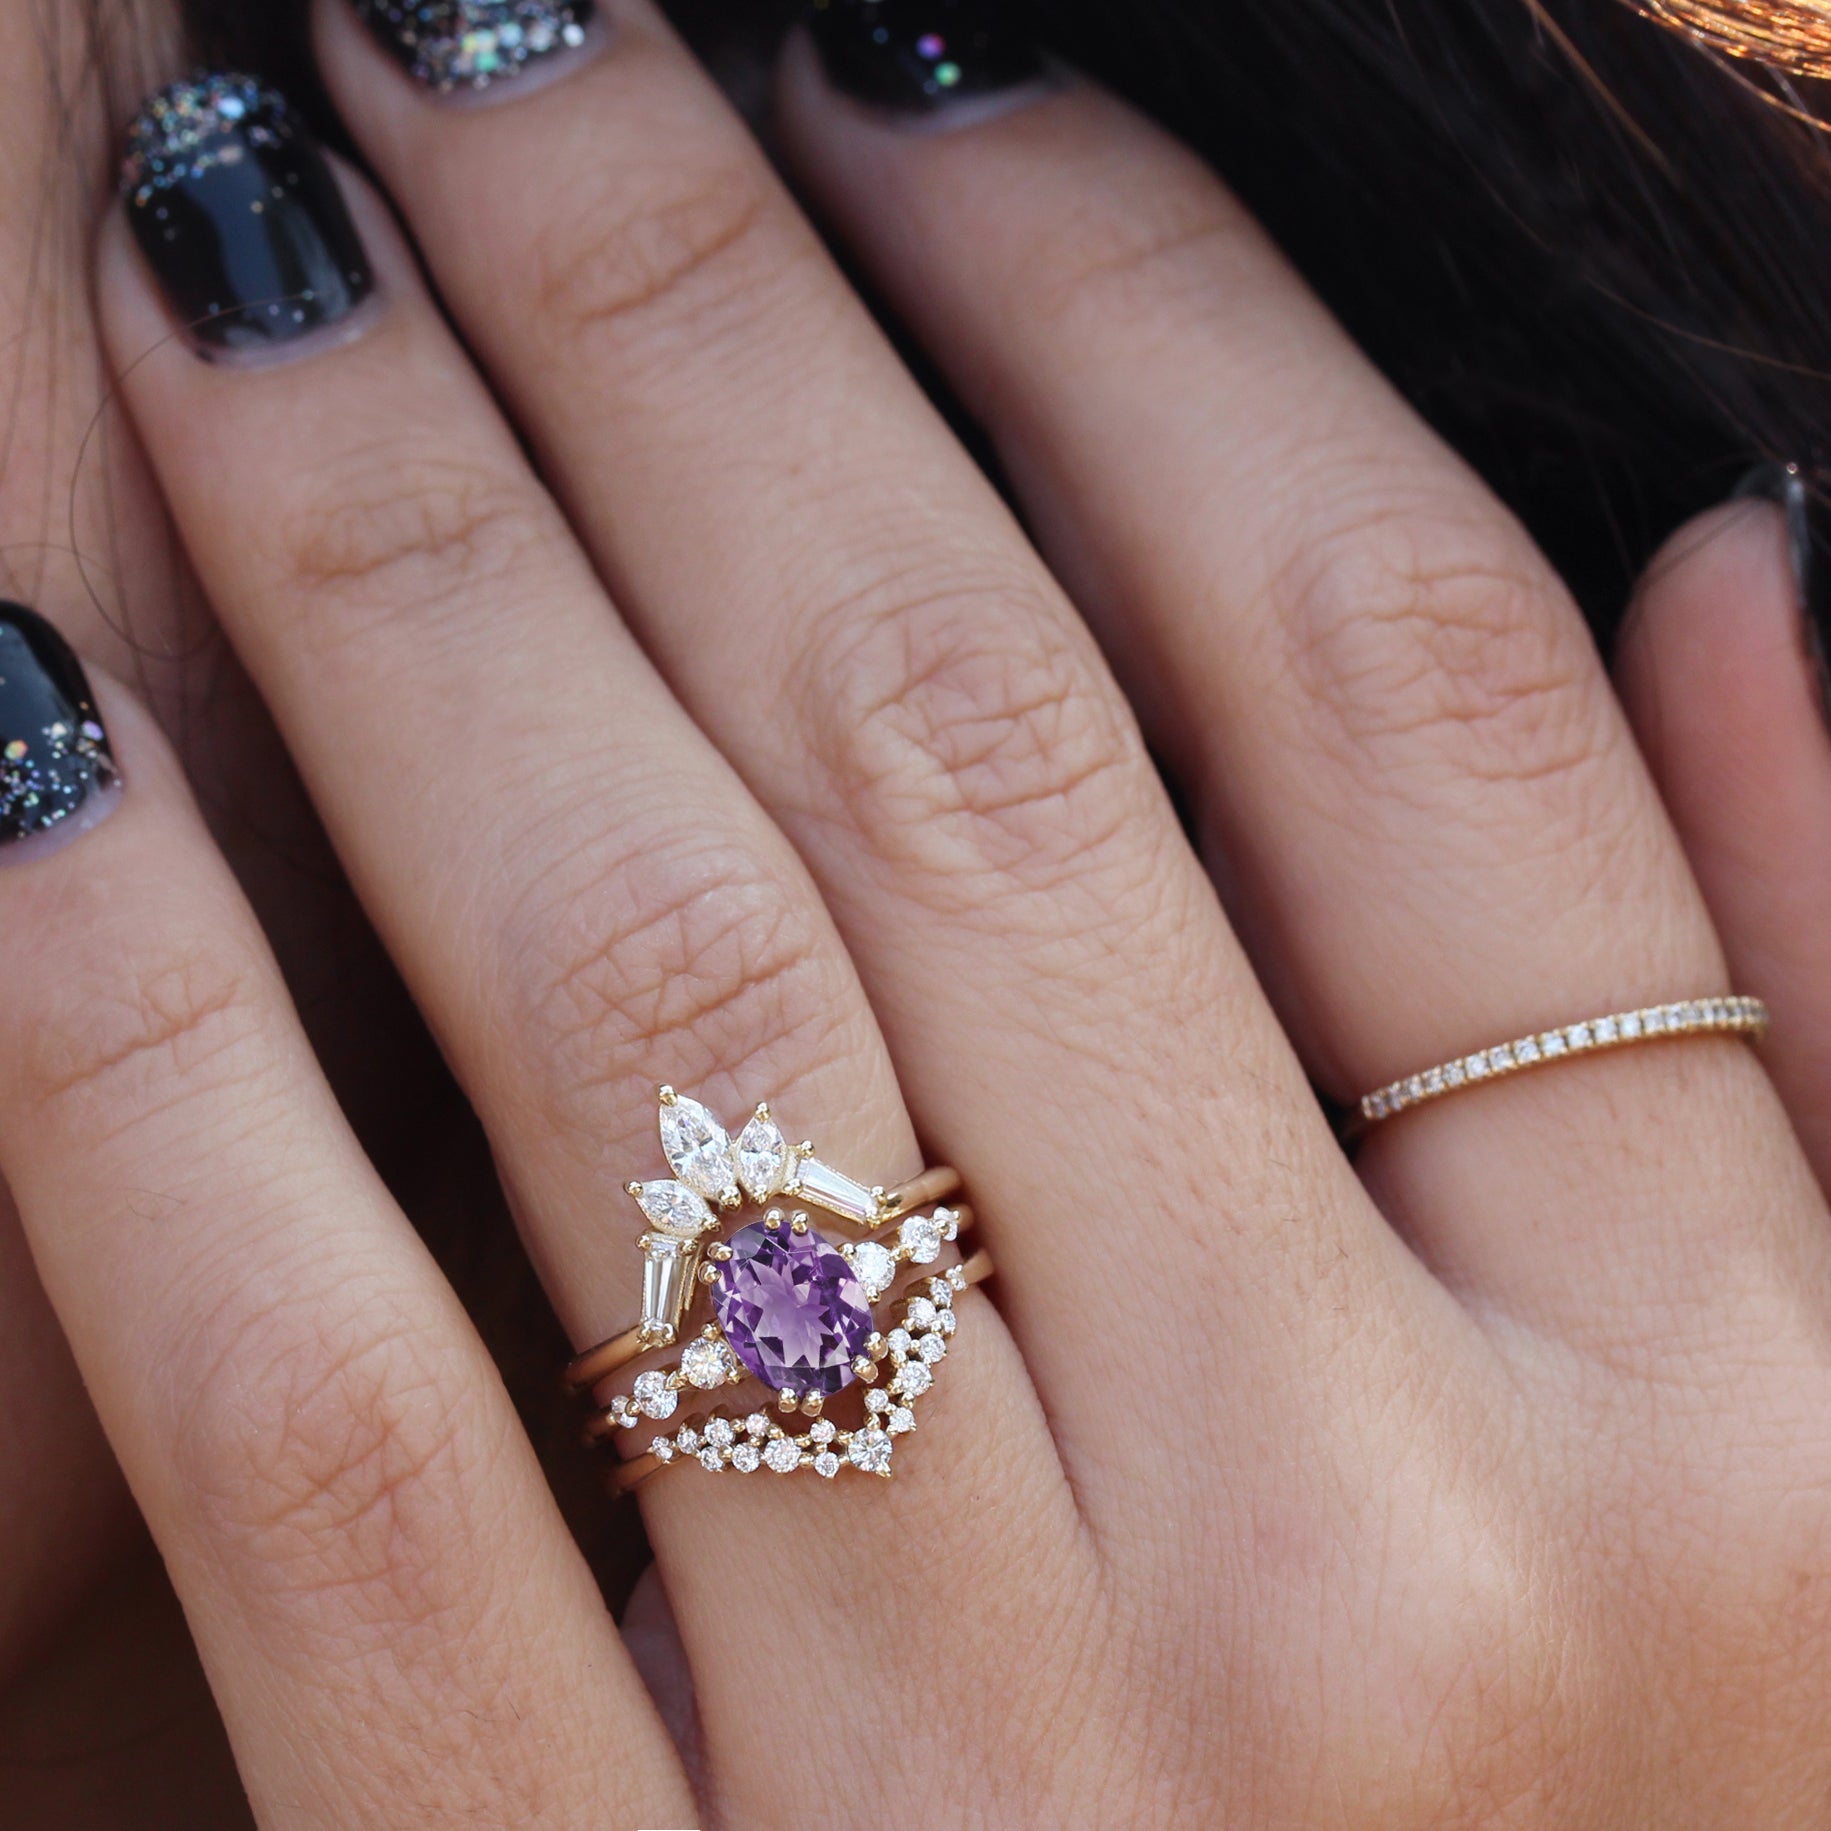 Candy pop Oval Amethyst and Diamond Ring ♥